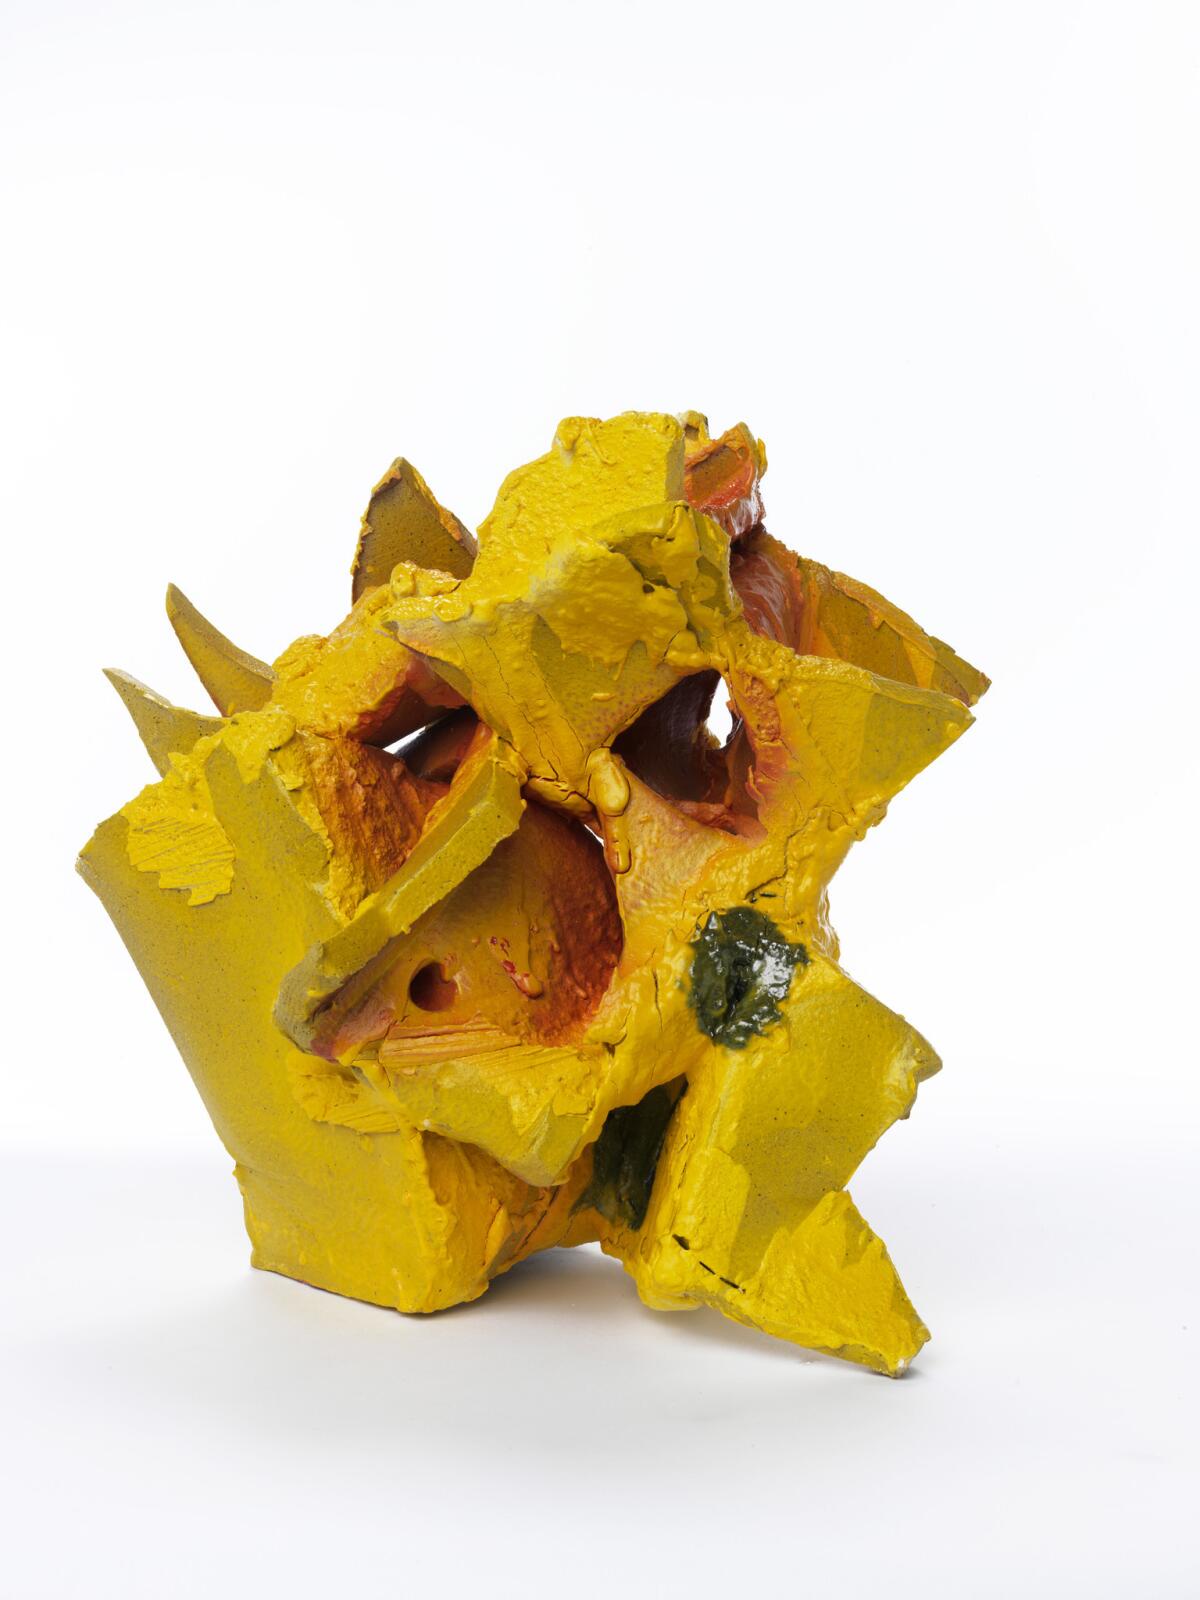 Lynda Benglis' “Querechos,” 2013. Glazed ceramic, 17 inches by 19 inches by 15 inches.